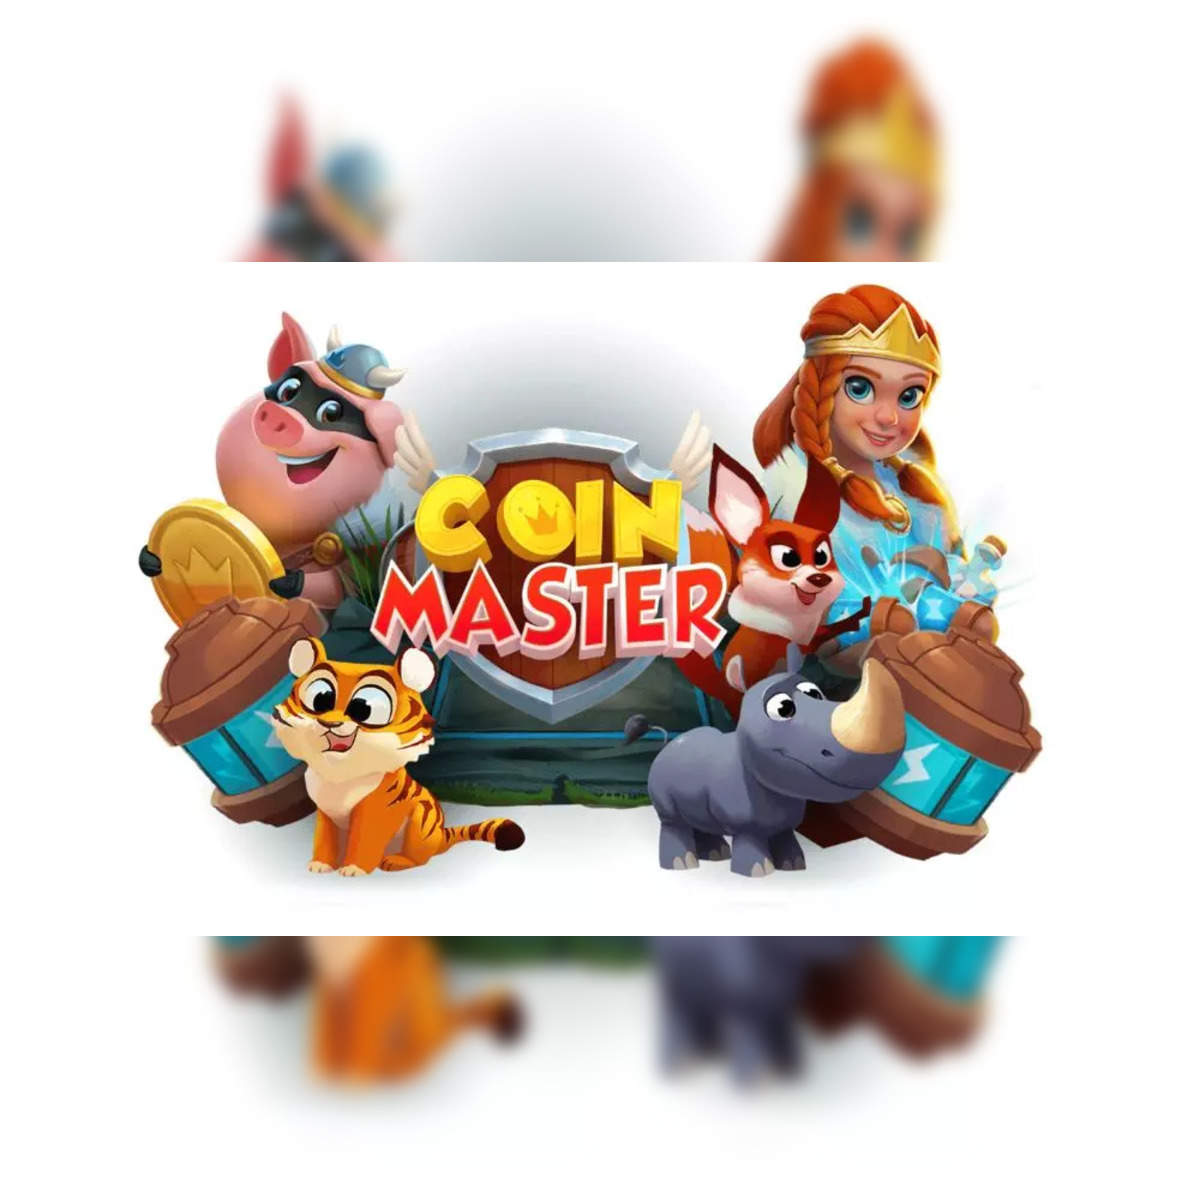 Coin Master Free Spins & Coins Generator | Coins, Coin master hack, Spinning